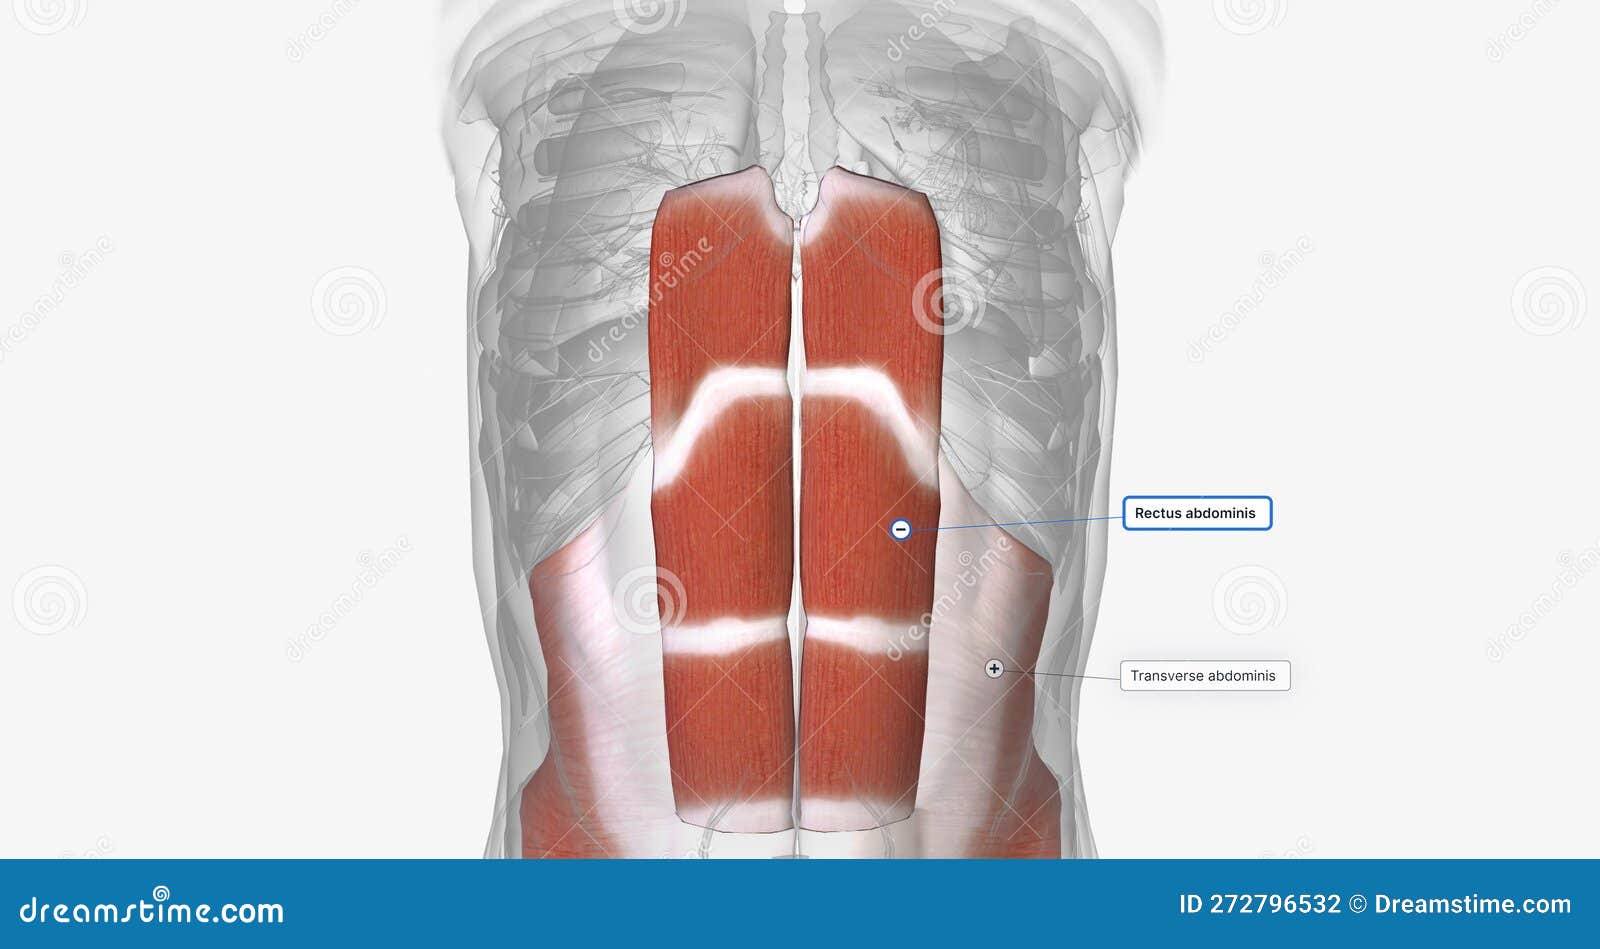 the deep abdominal muscles include the transverse abdominis and the rectus abdominis